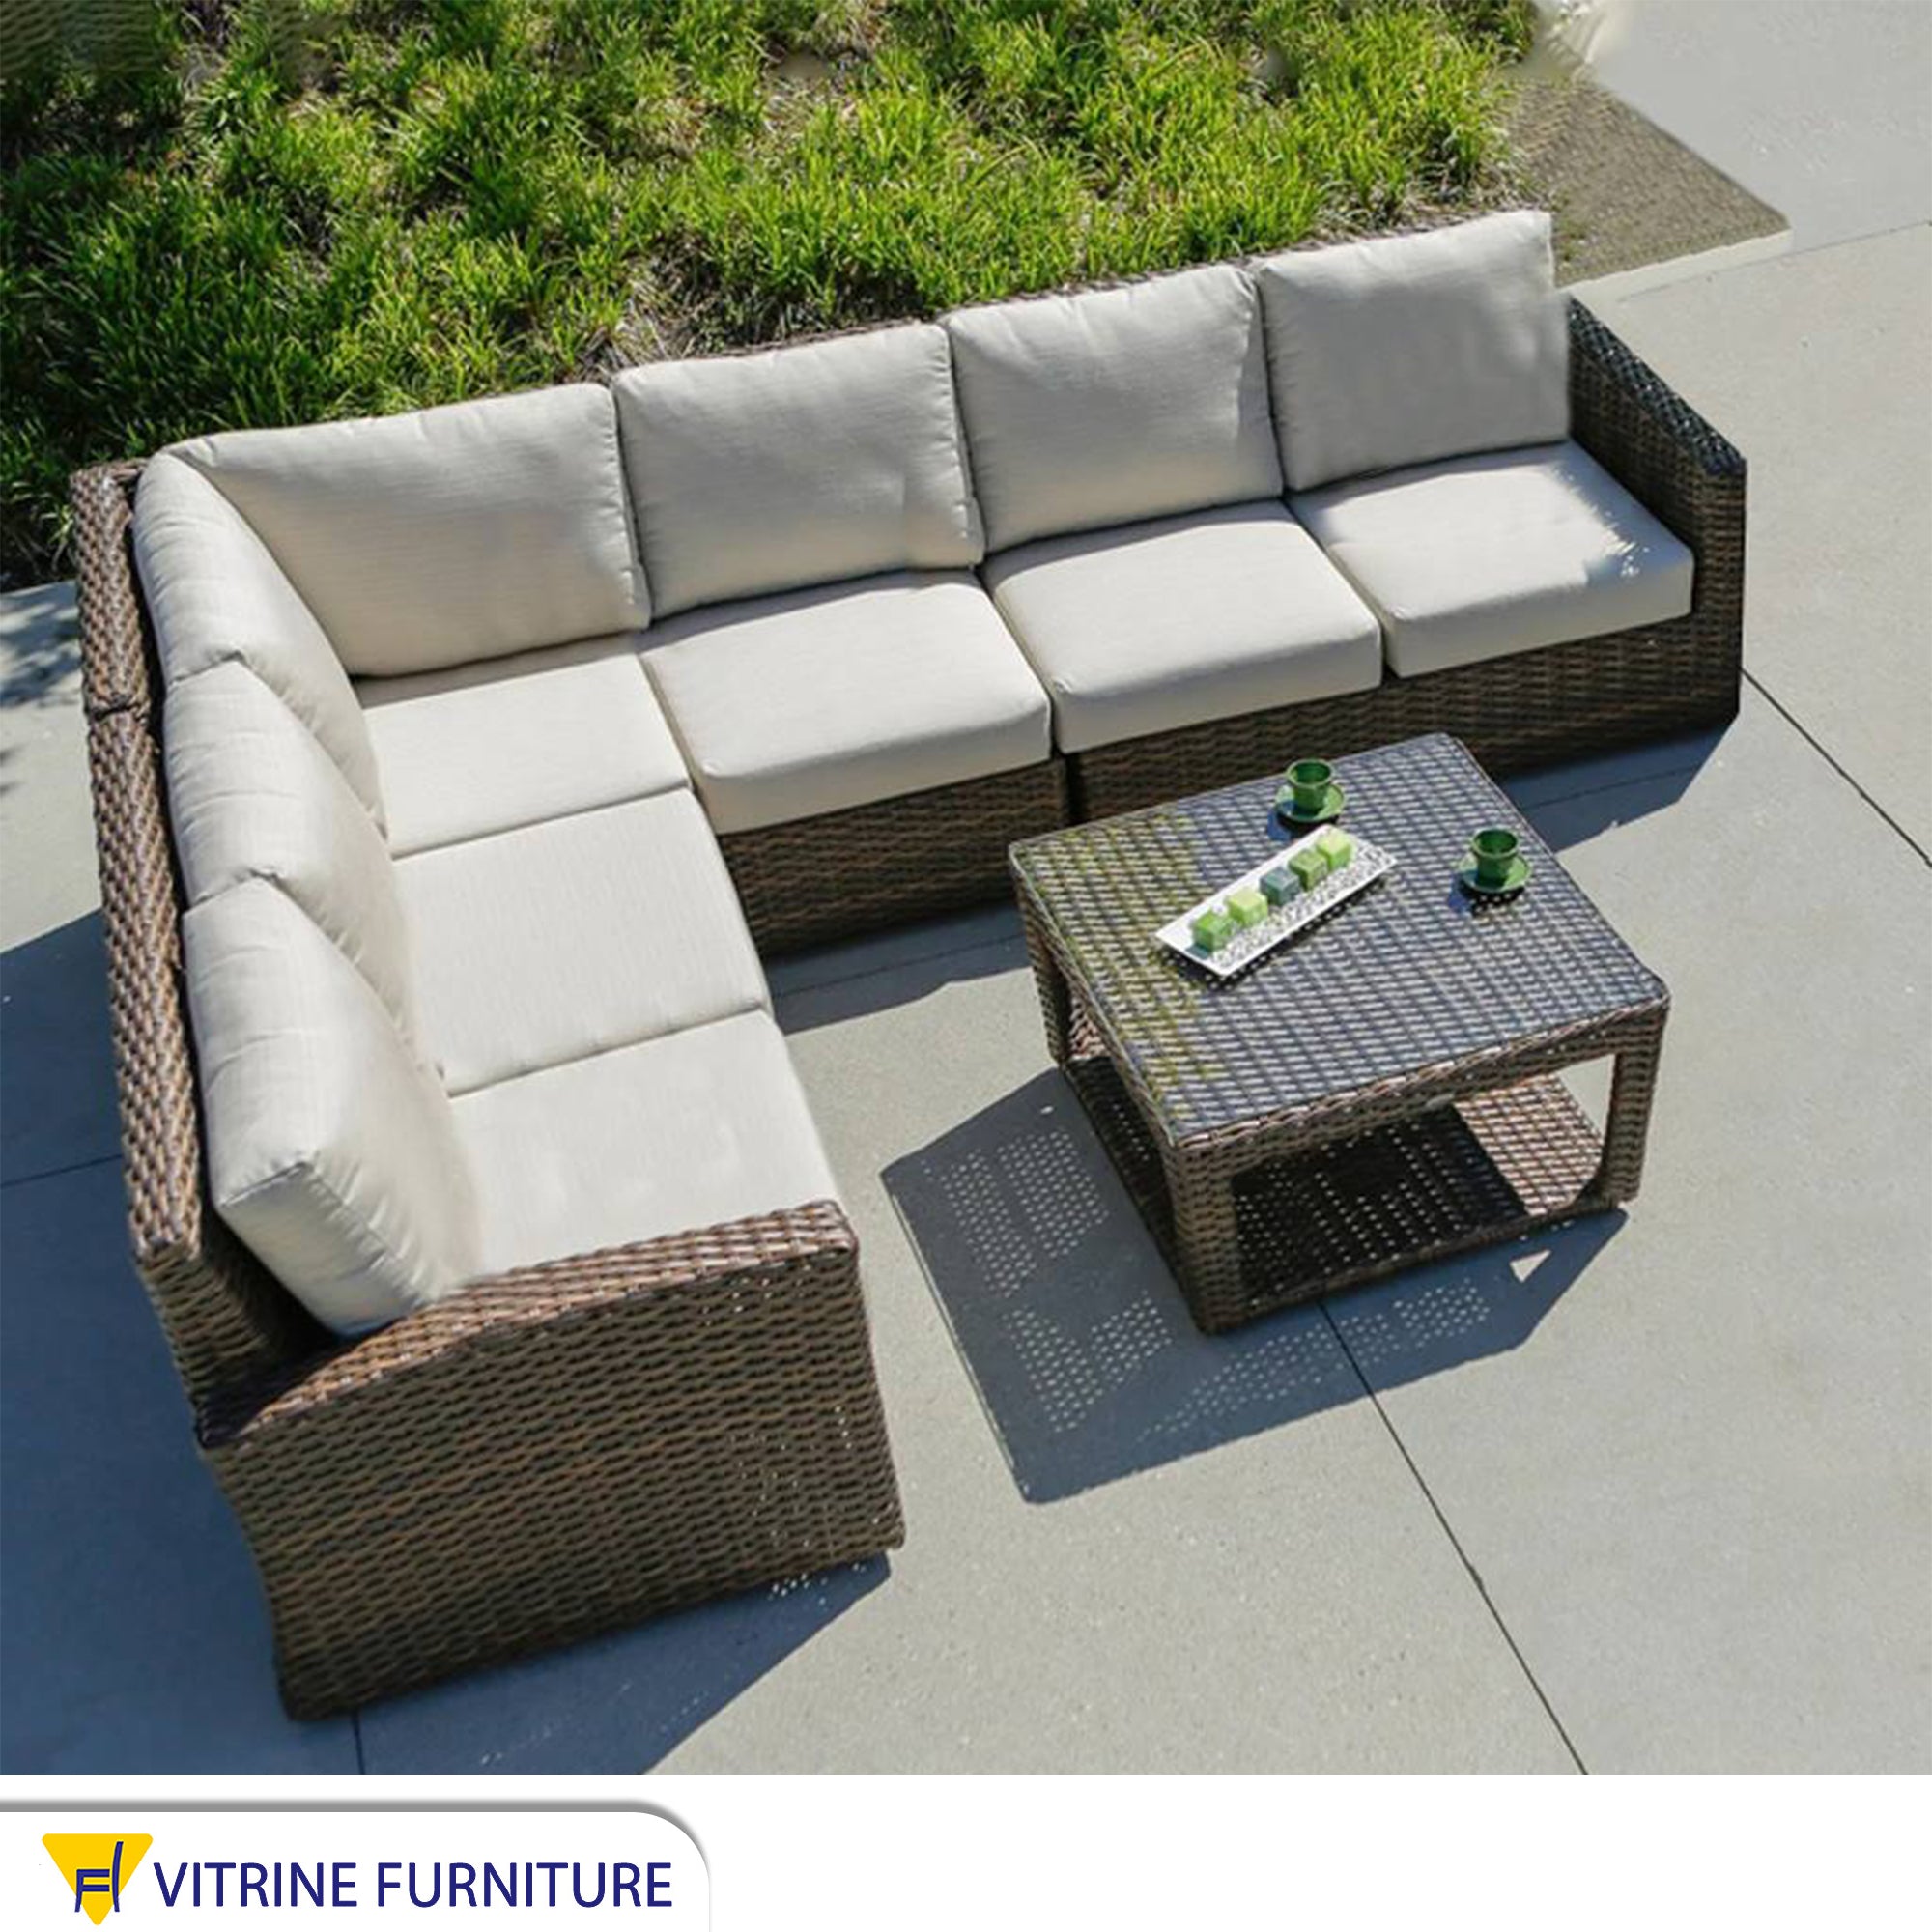 VIP outdoor corner set with two sofas and a table